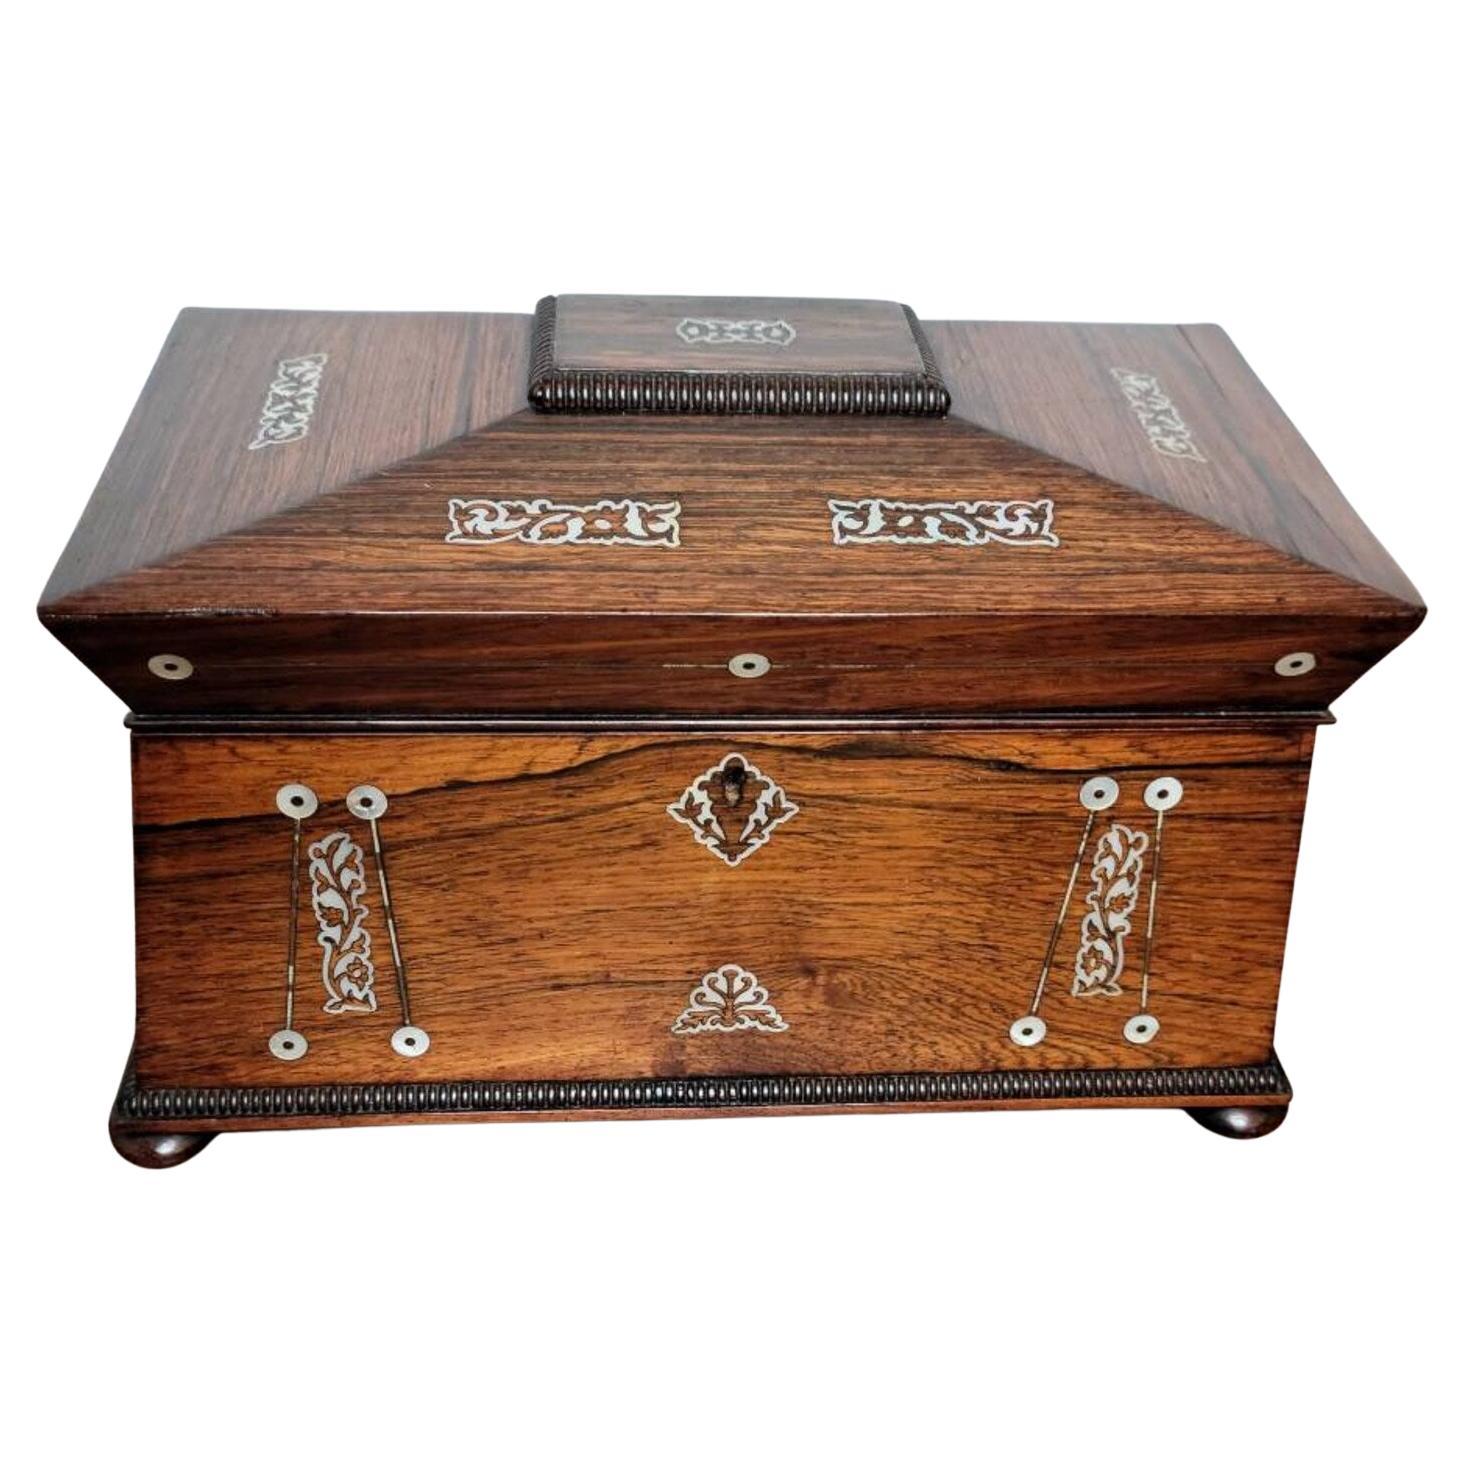 Early 19th Century English Regency Rosewood Mother-of-pearl Tea Caddy For Sale